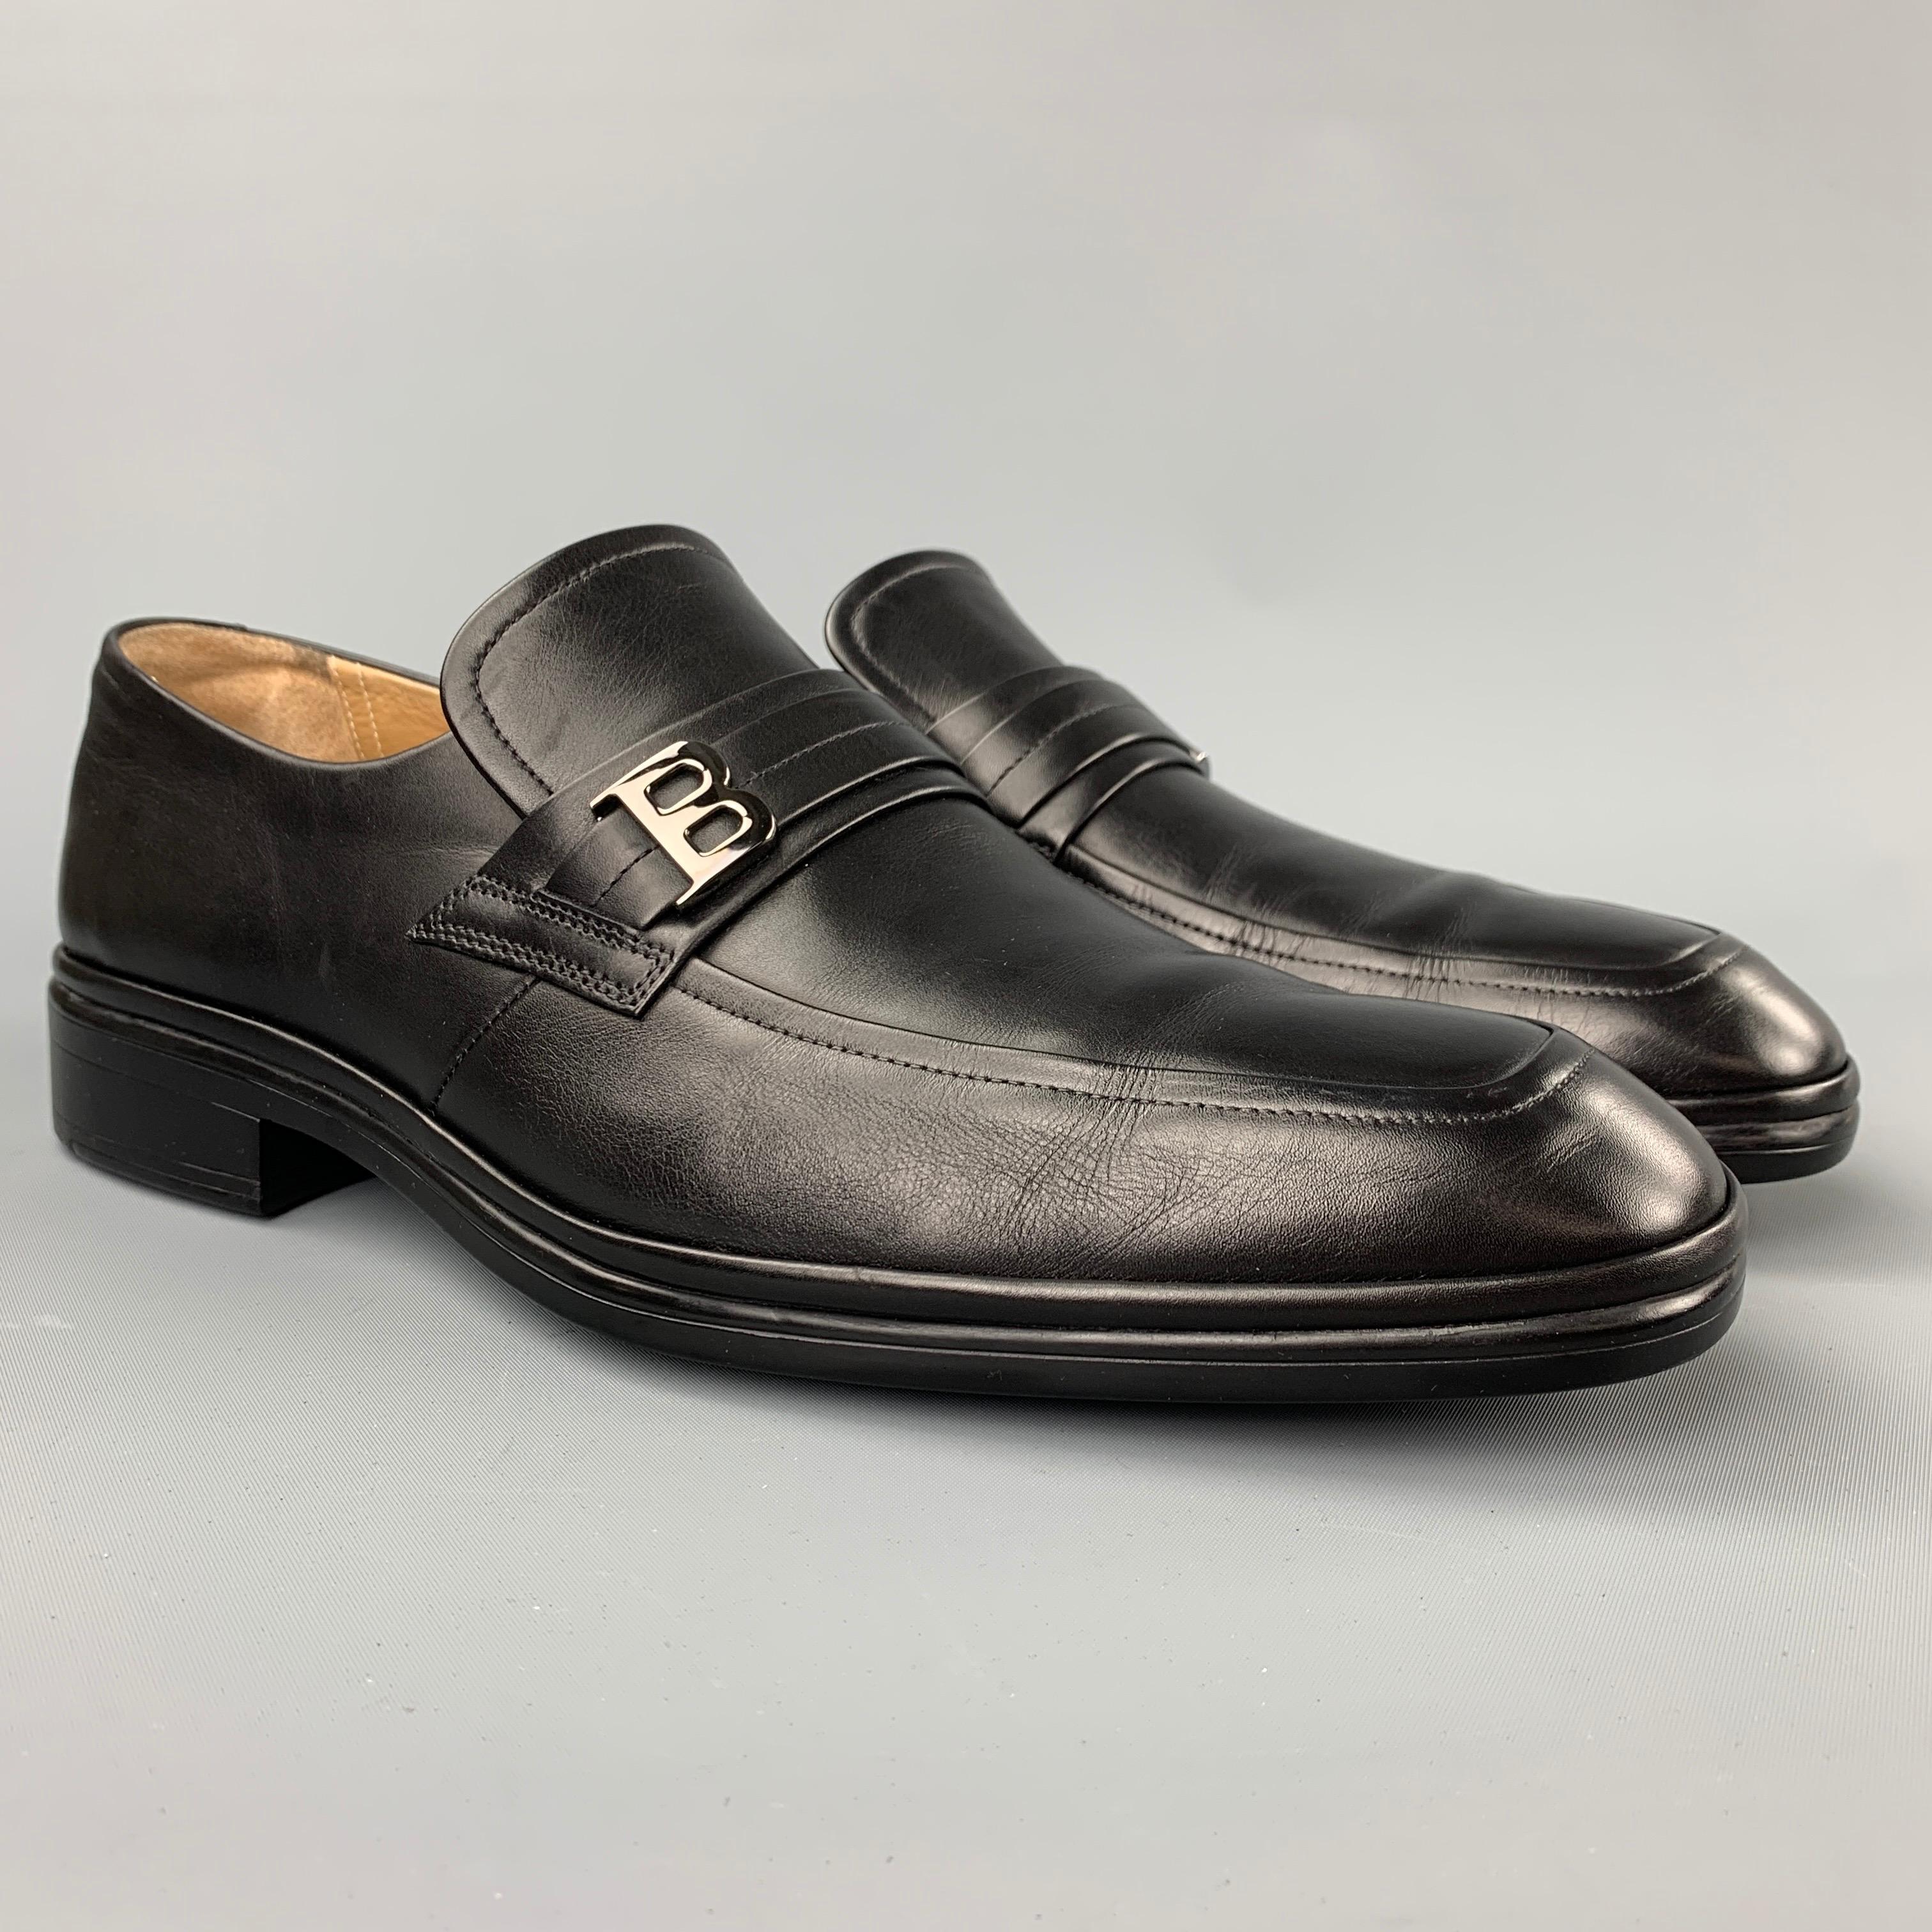 BALLY loafers comes in a black leather featuring a cap toe, front strap, silver tone logo detail, and a wooden sole. Made in Switzerland.

New With Box.
Marked: EU 9 E / US 10 D

Outsole: 12 in. x 4 in.